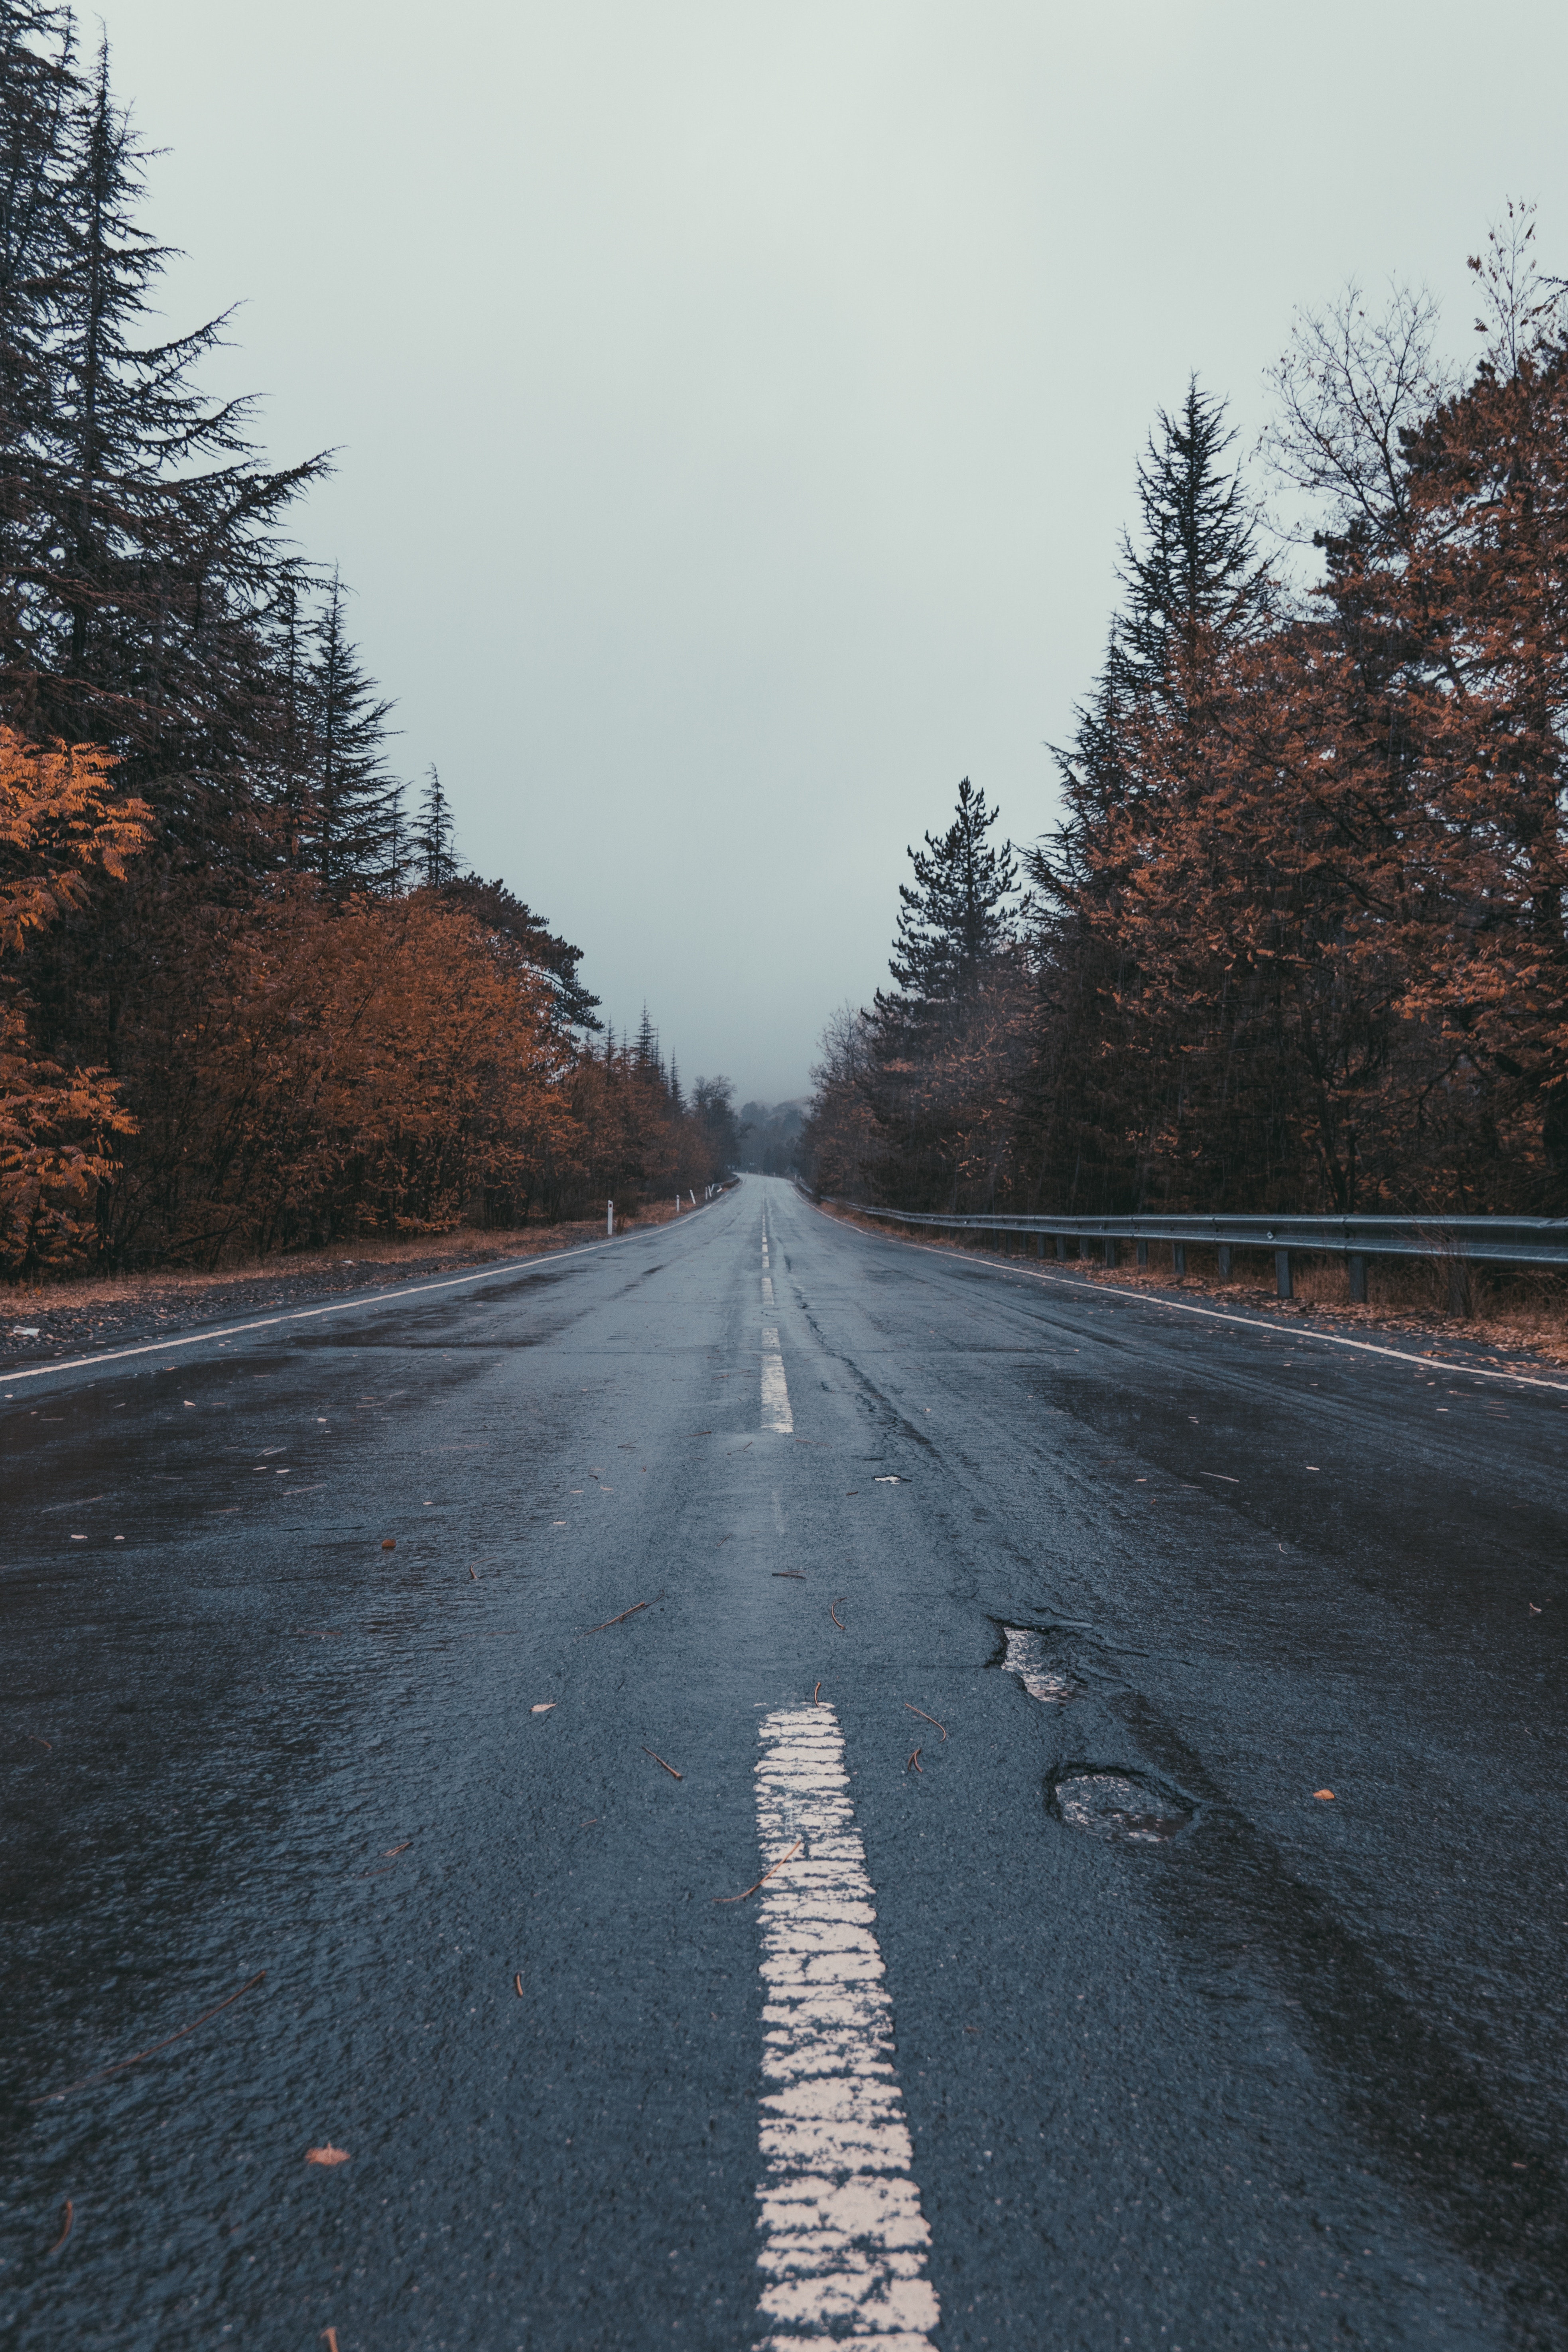 mainly cloudy, nature, trees, road, markup, overcast 5K